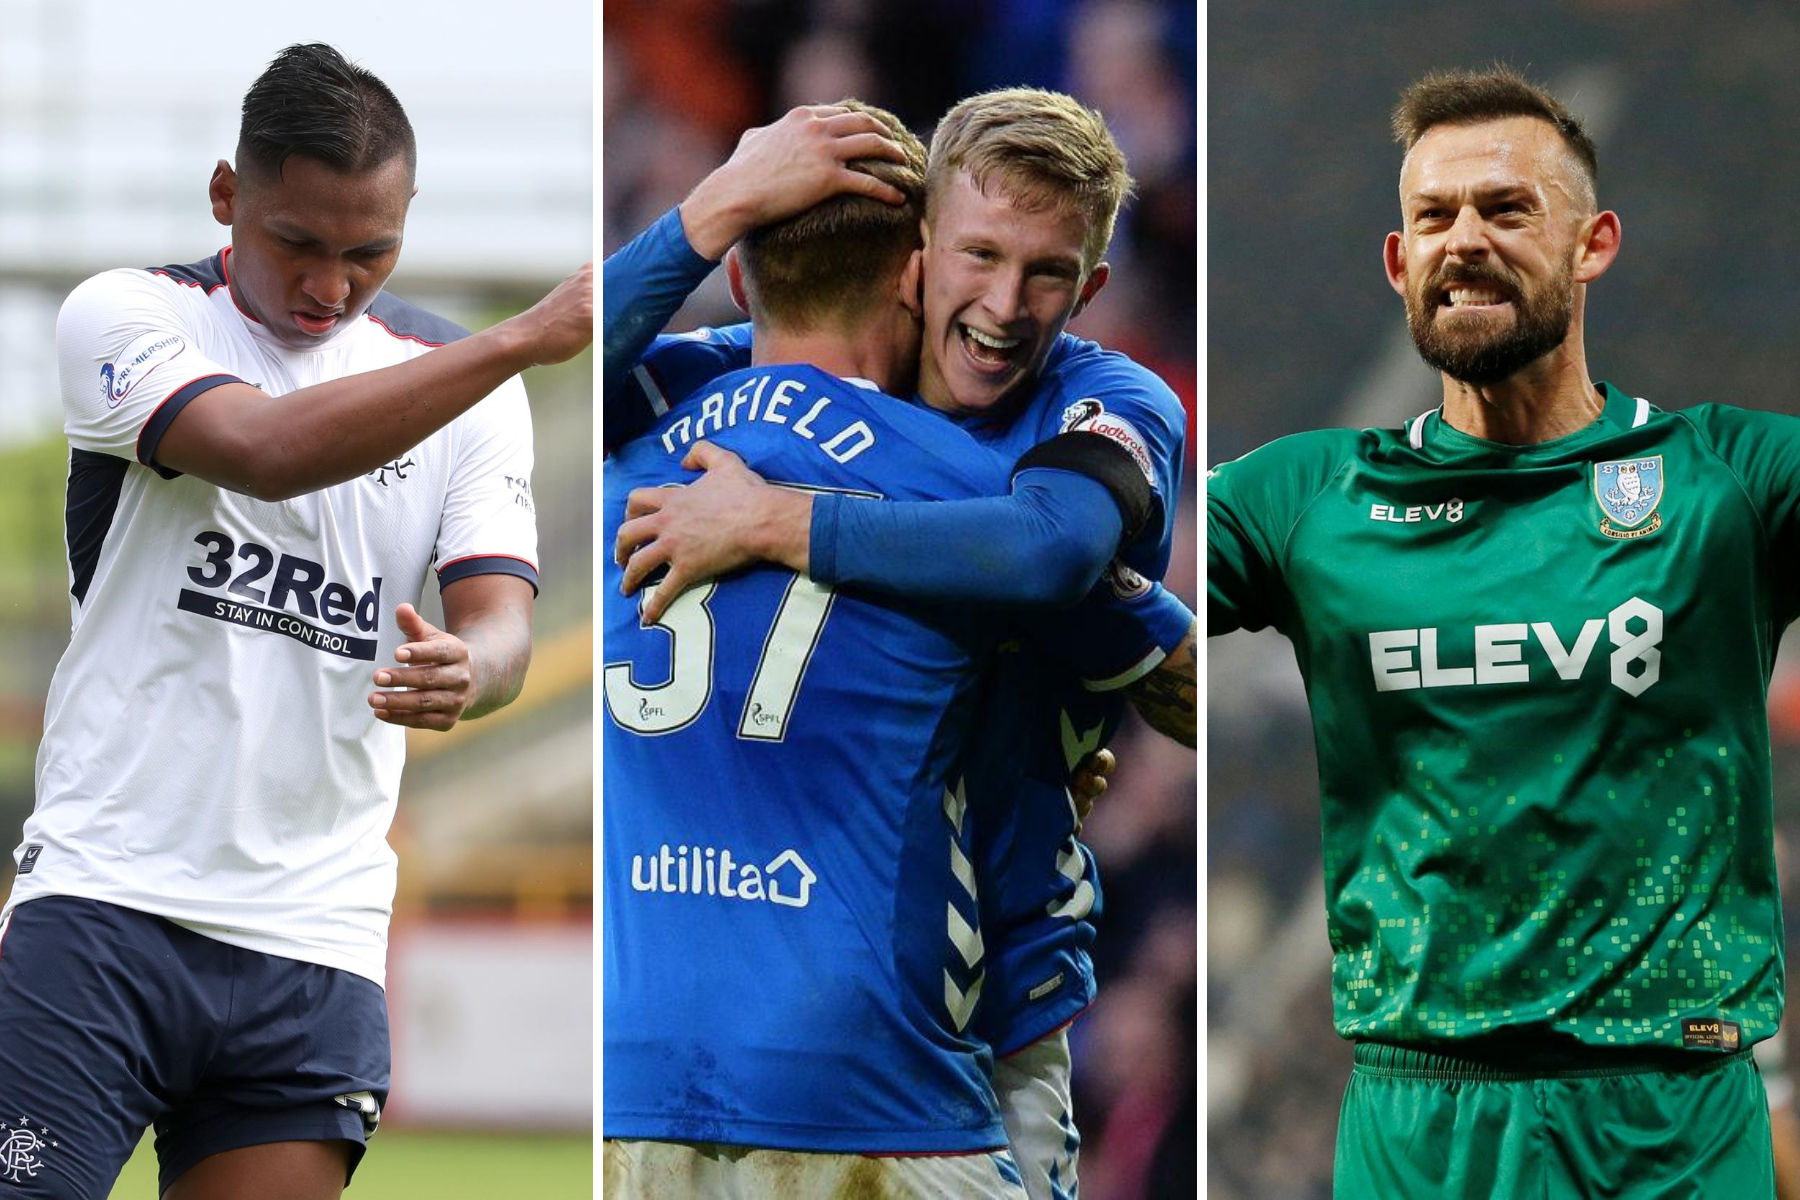 Scottish transfer news LIVE: Celtic close in on Fletcher, latest on Rangers striker Morelos and McCrorie wanted by Hibs